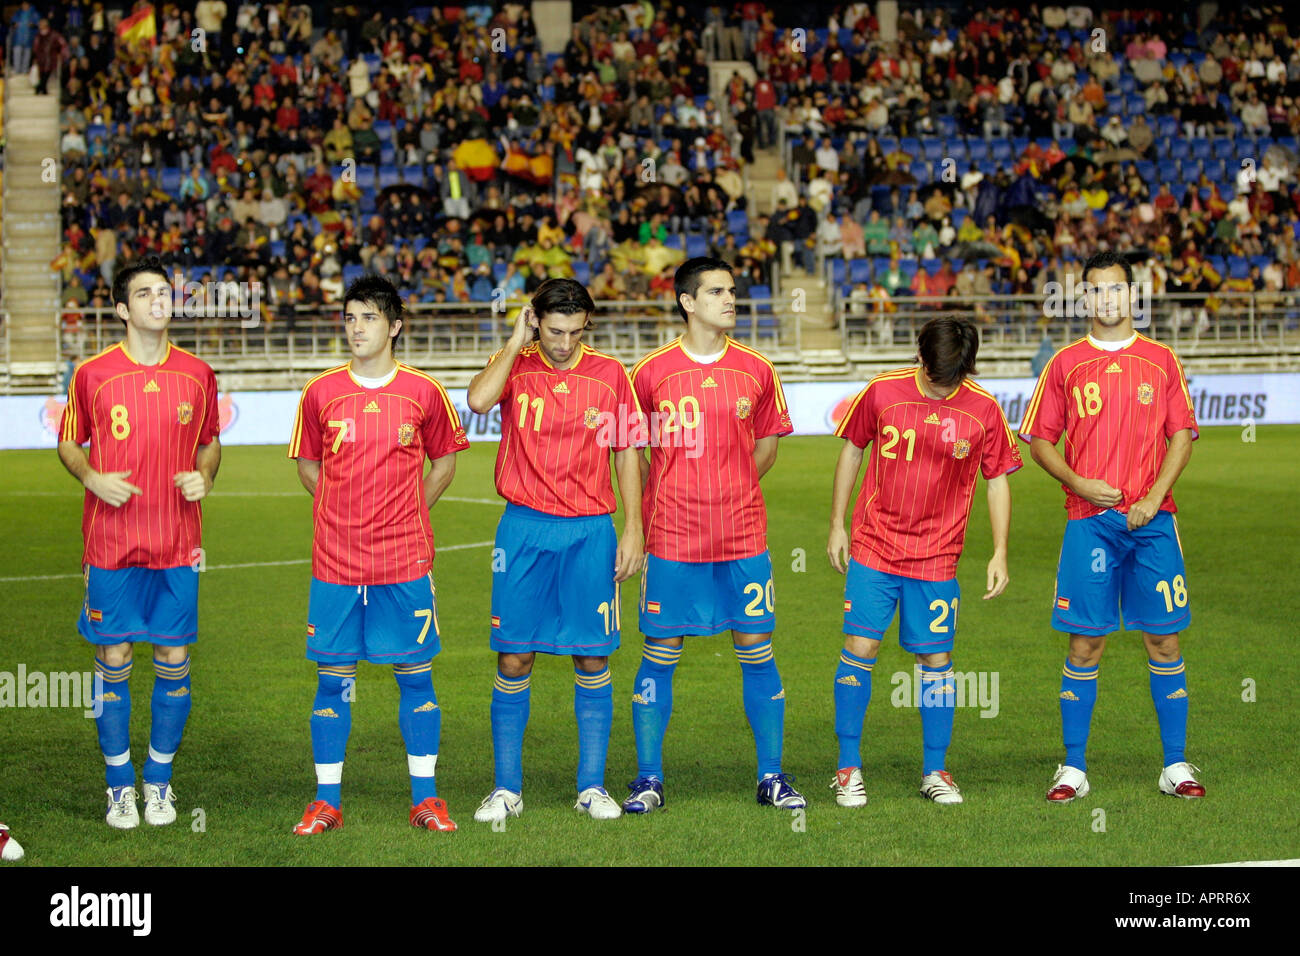 Spanish national team forming. Stock Photo